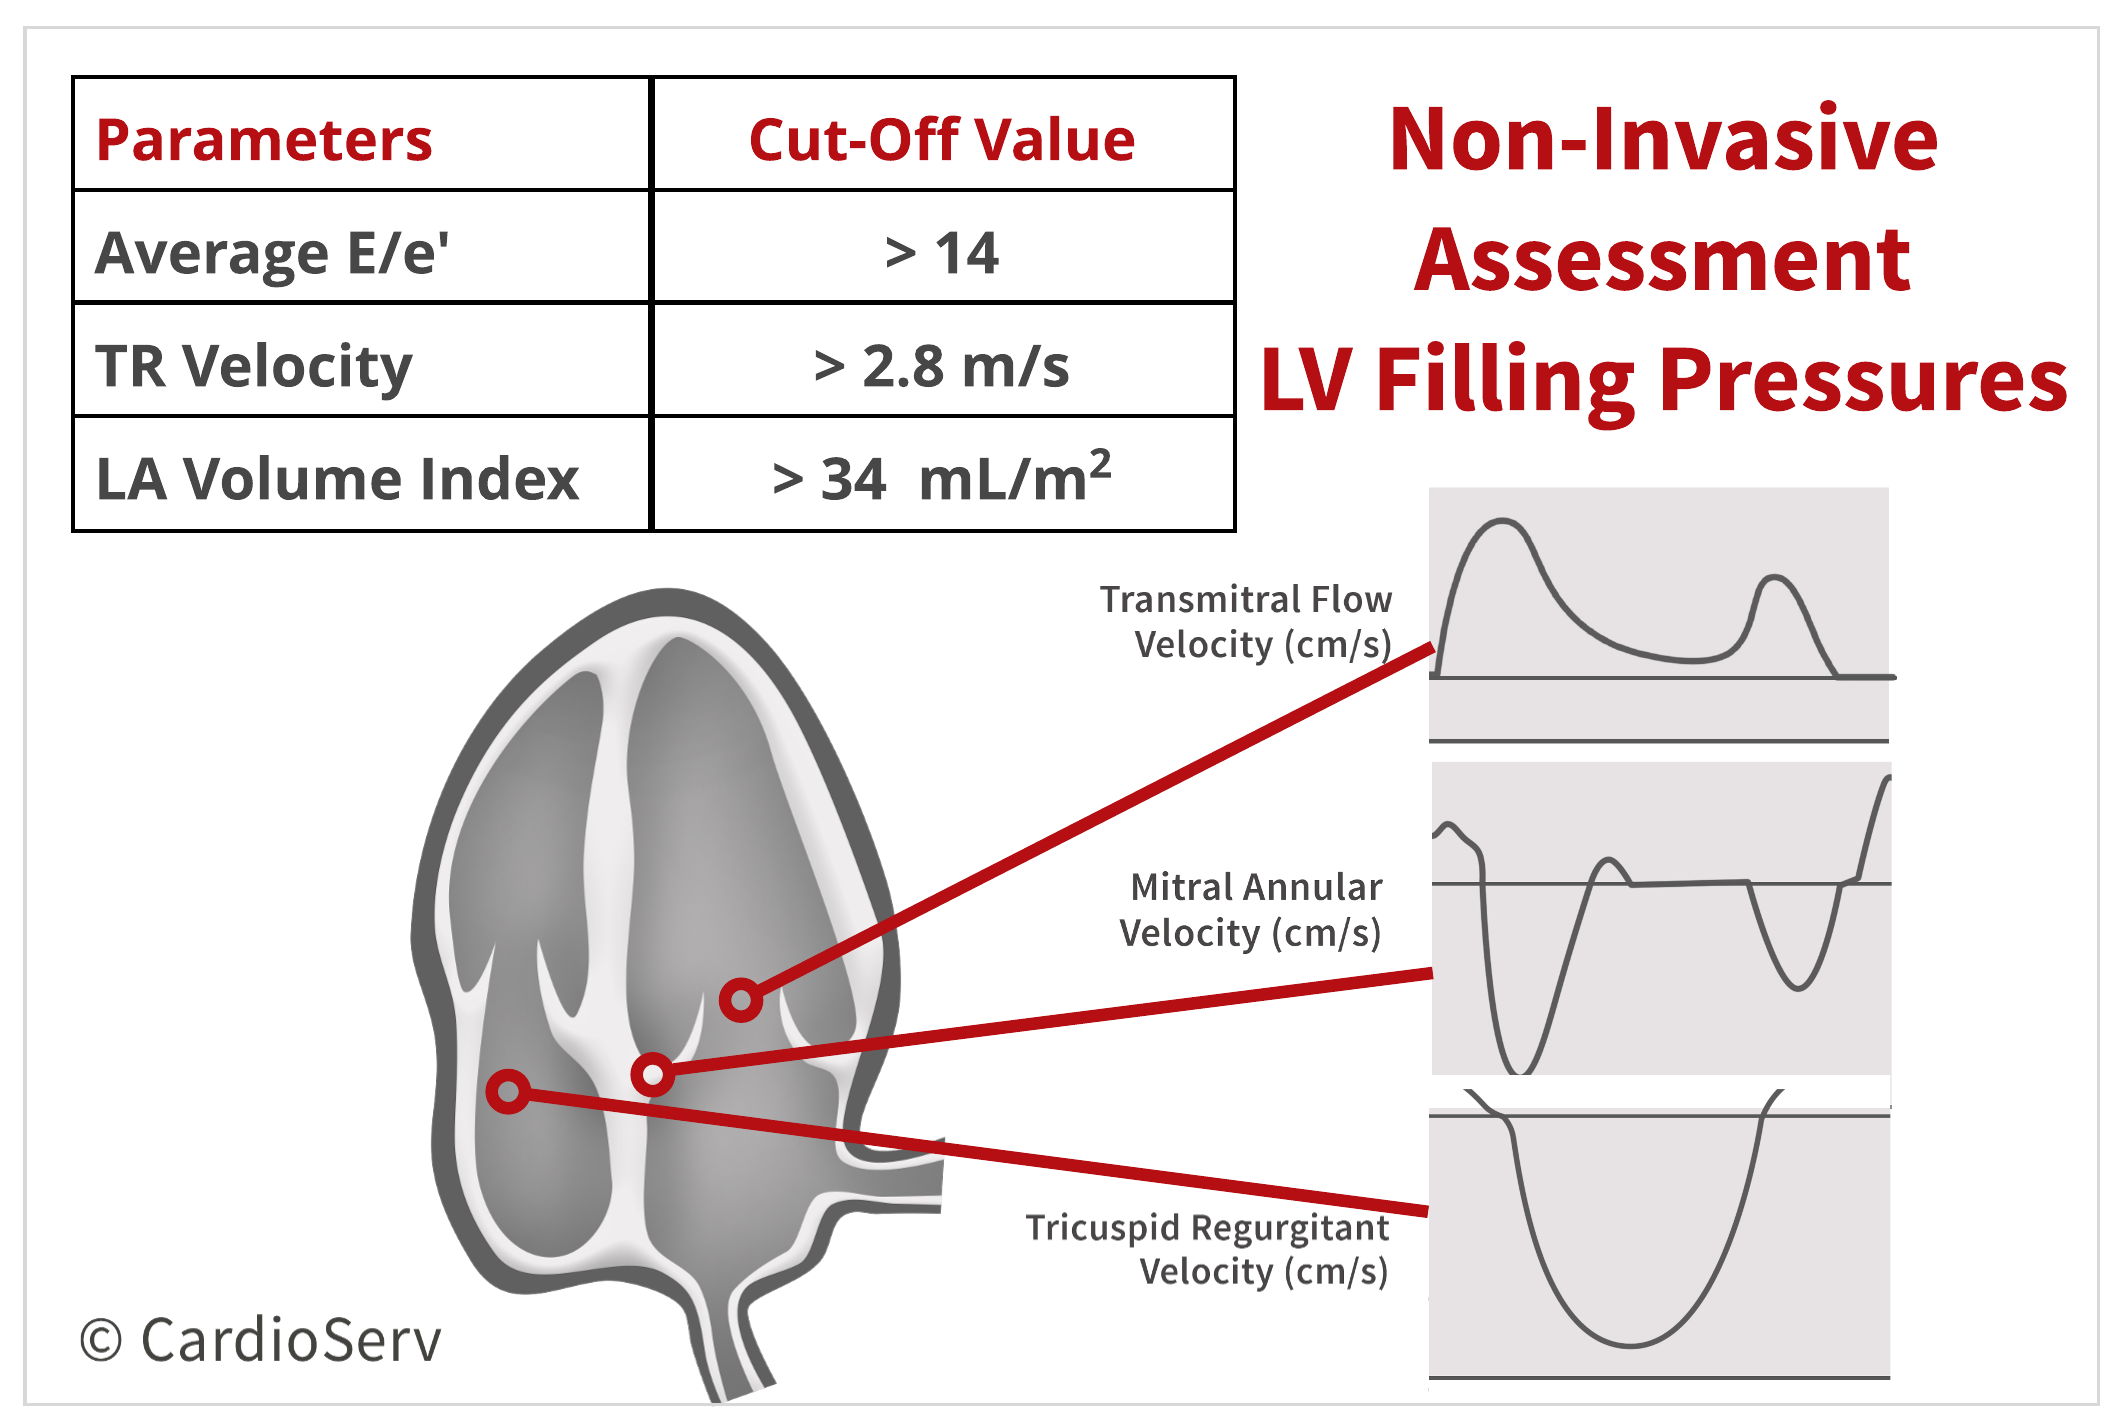 Specific Echo Parameters that Indicate Elevated LAP